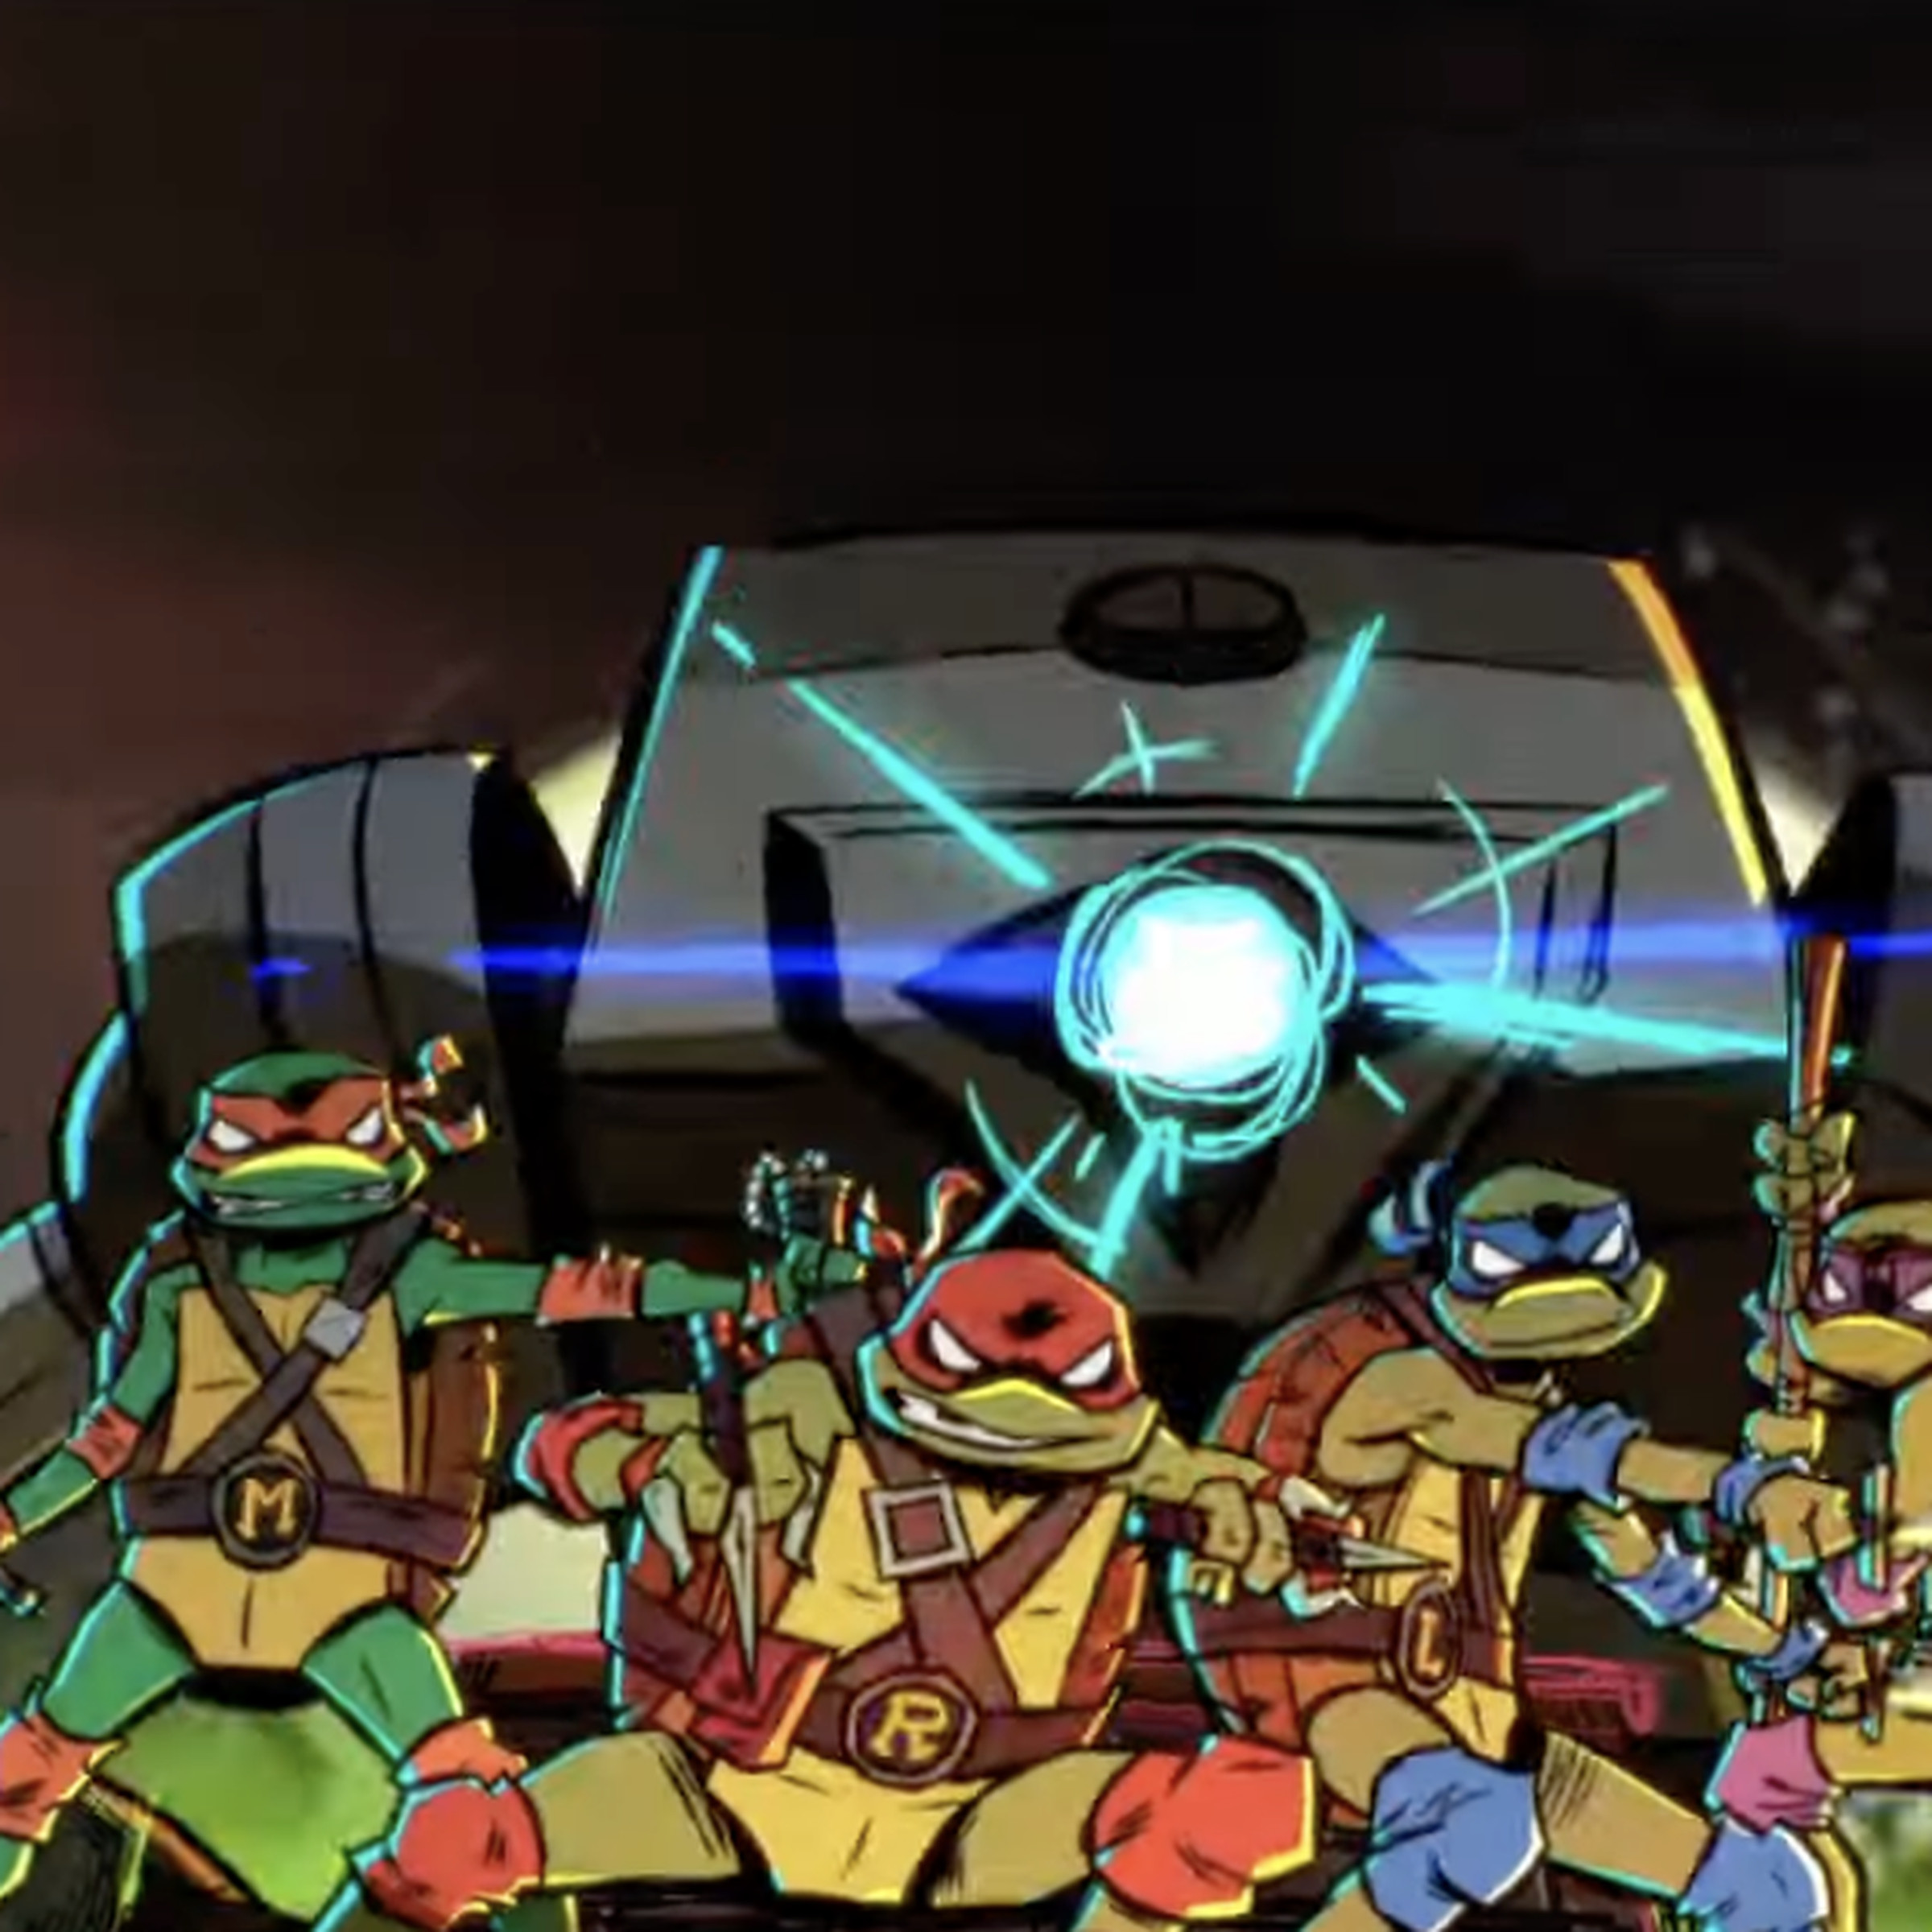 The four turtles stand in fighting poses while a giant robot rises up from behind them.